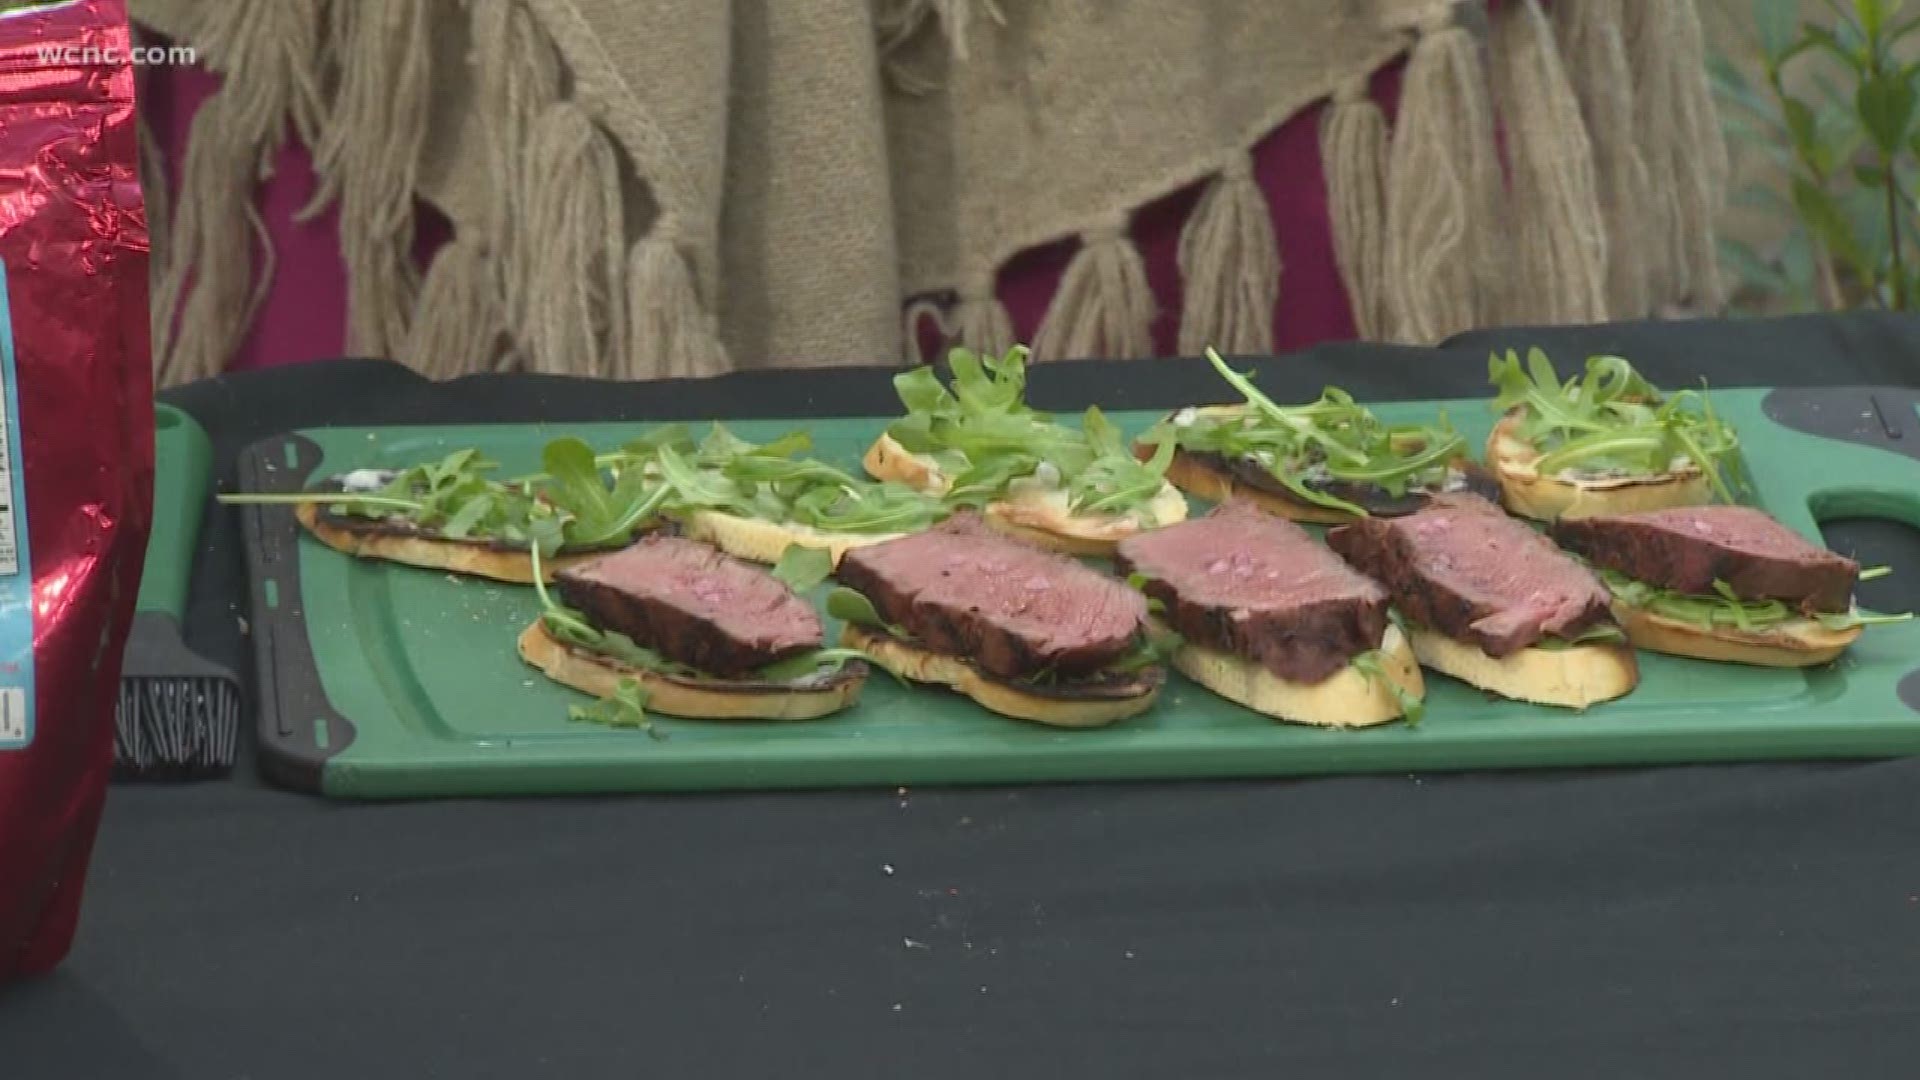 Grill master Jack Arnold shares a filet mignon recipe that’s unique and a crowd pleaser.